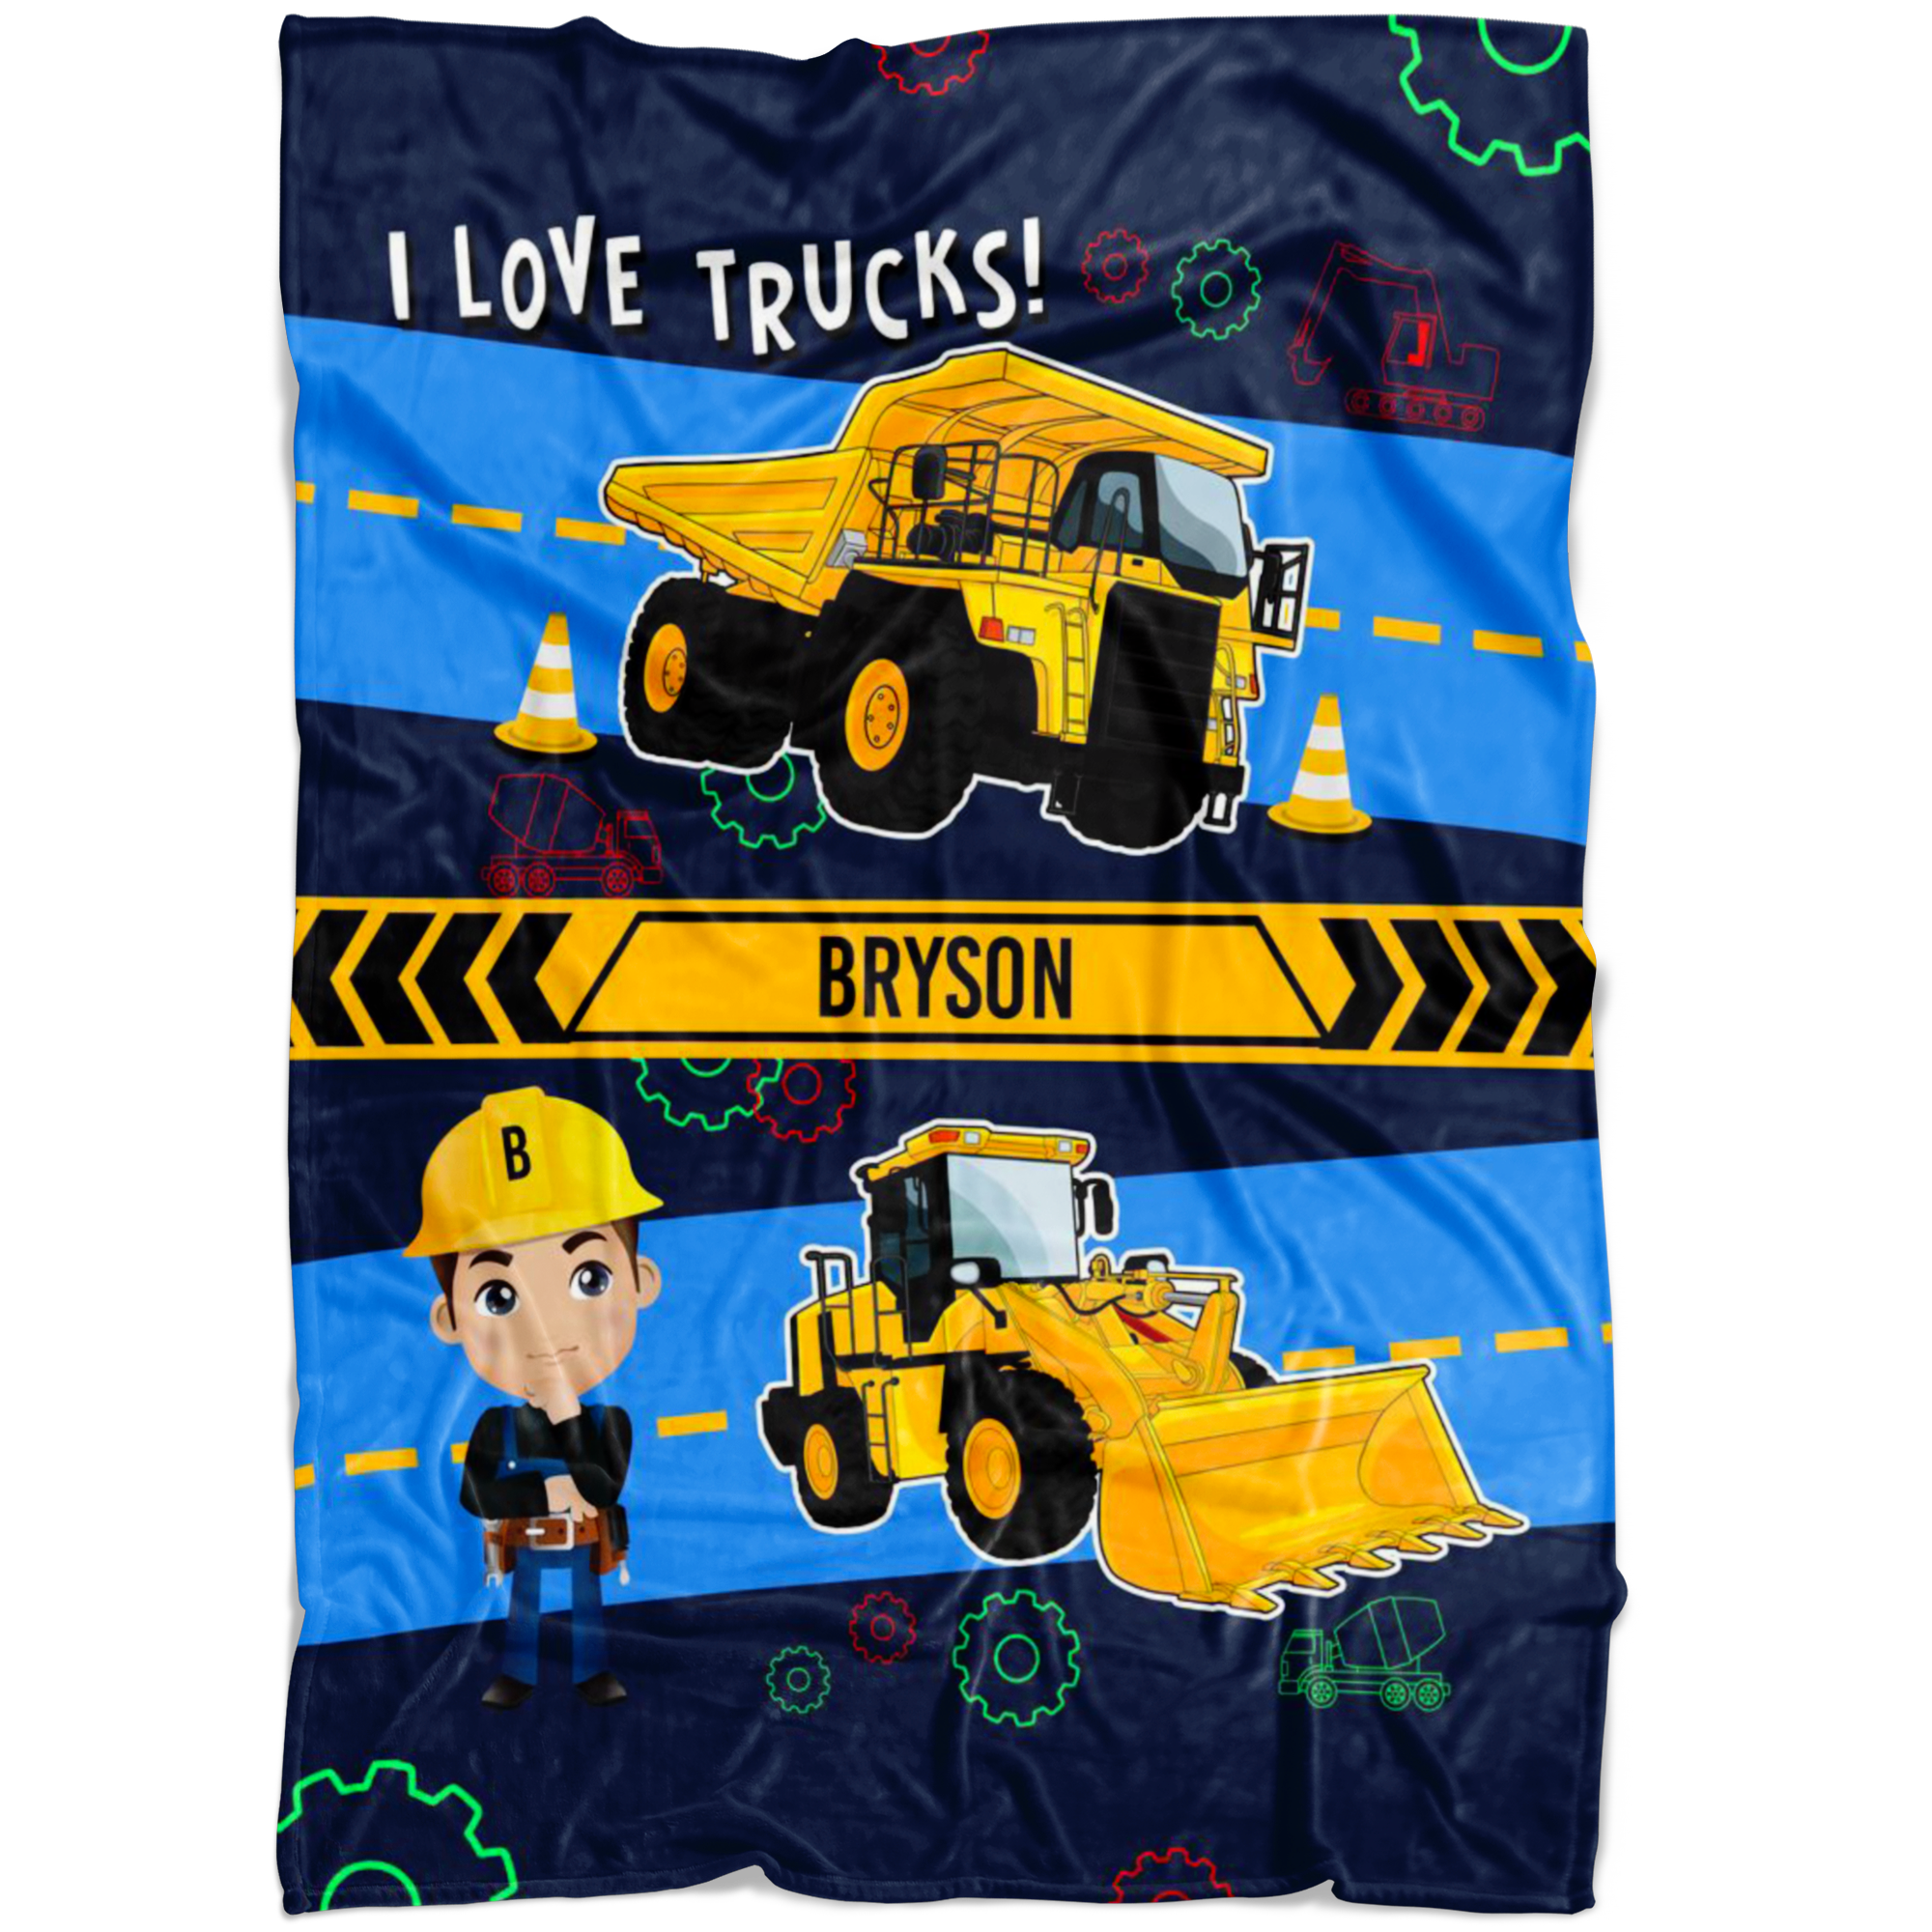 Personalized Name I Love Trucks Blanket for Boys & Girls with Character Personalization - Bryson